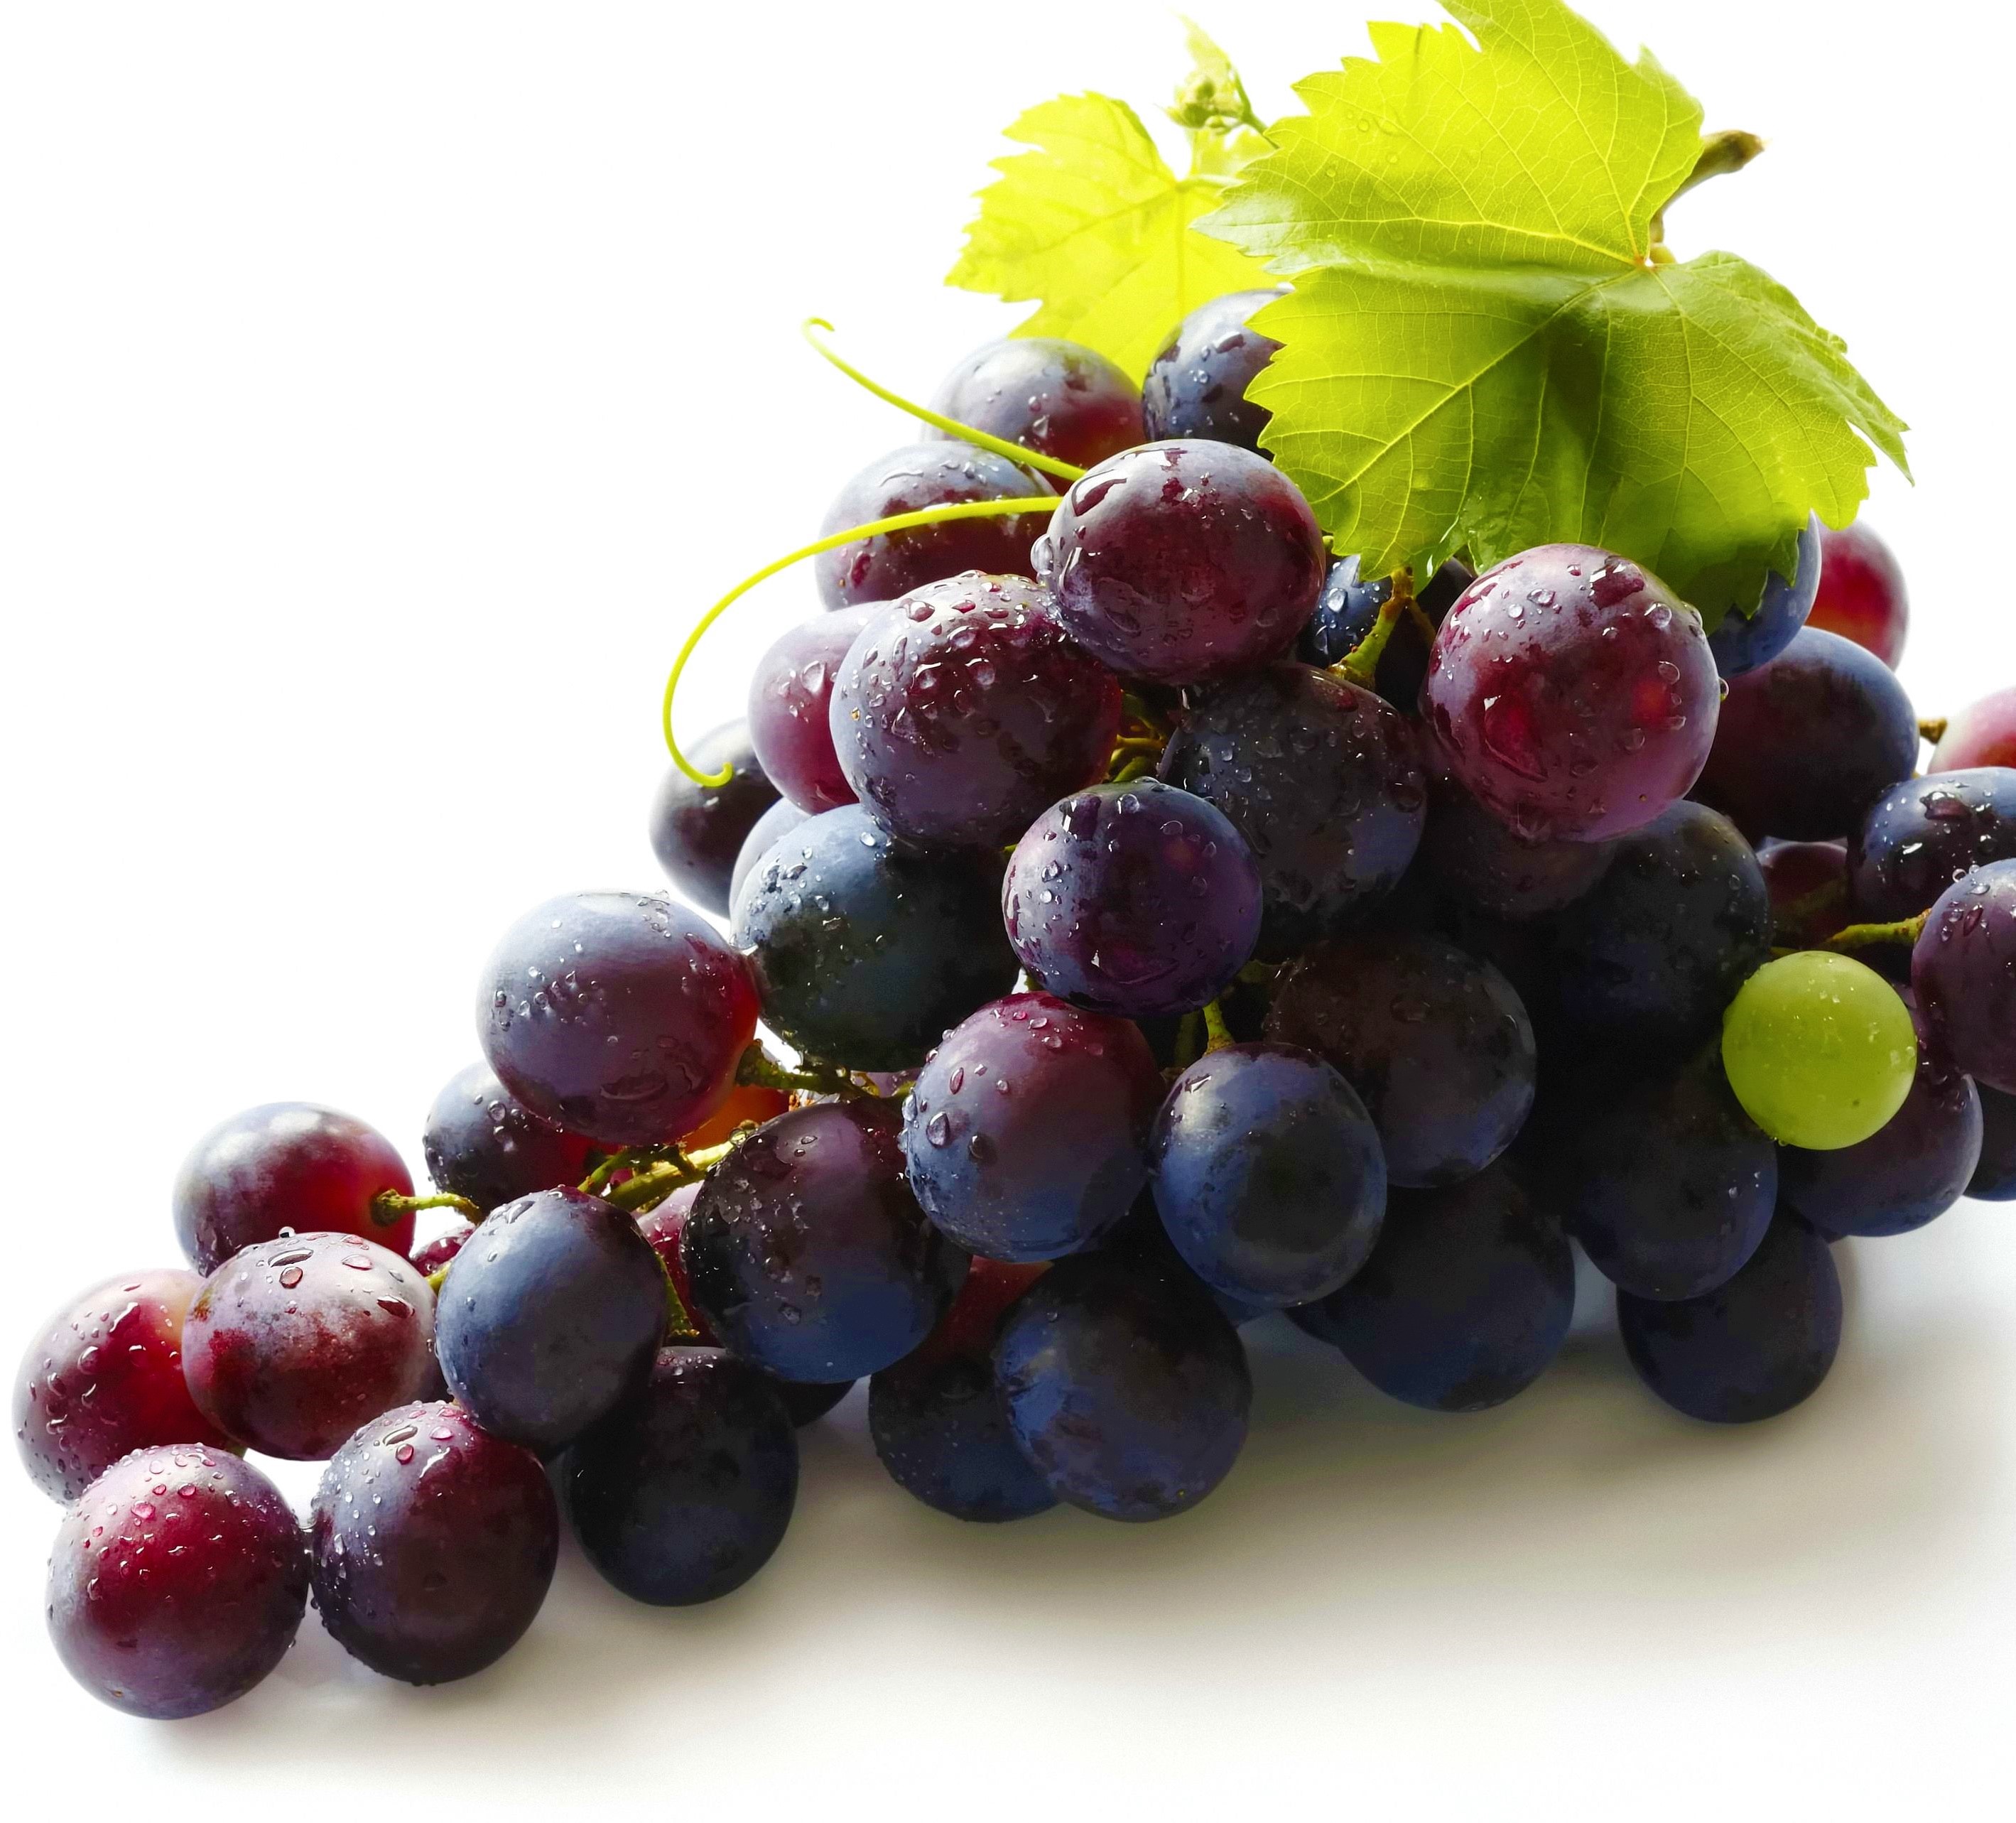 4. Bunch-of-grapes.jpg